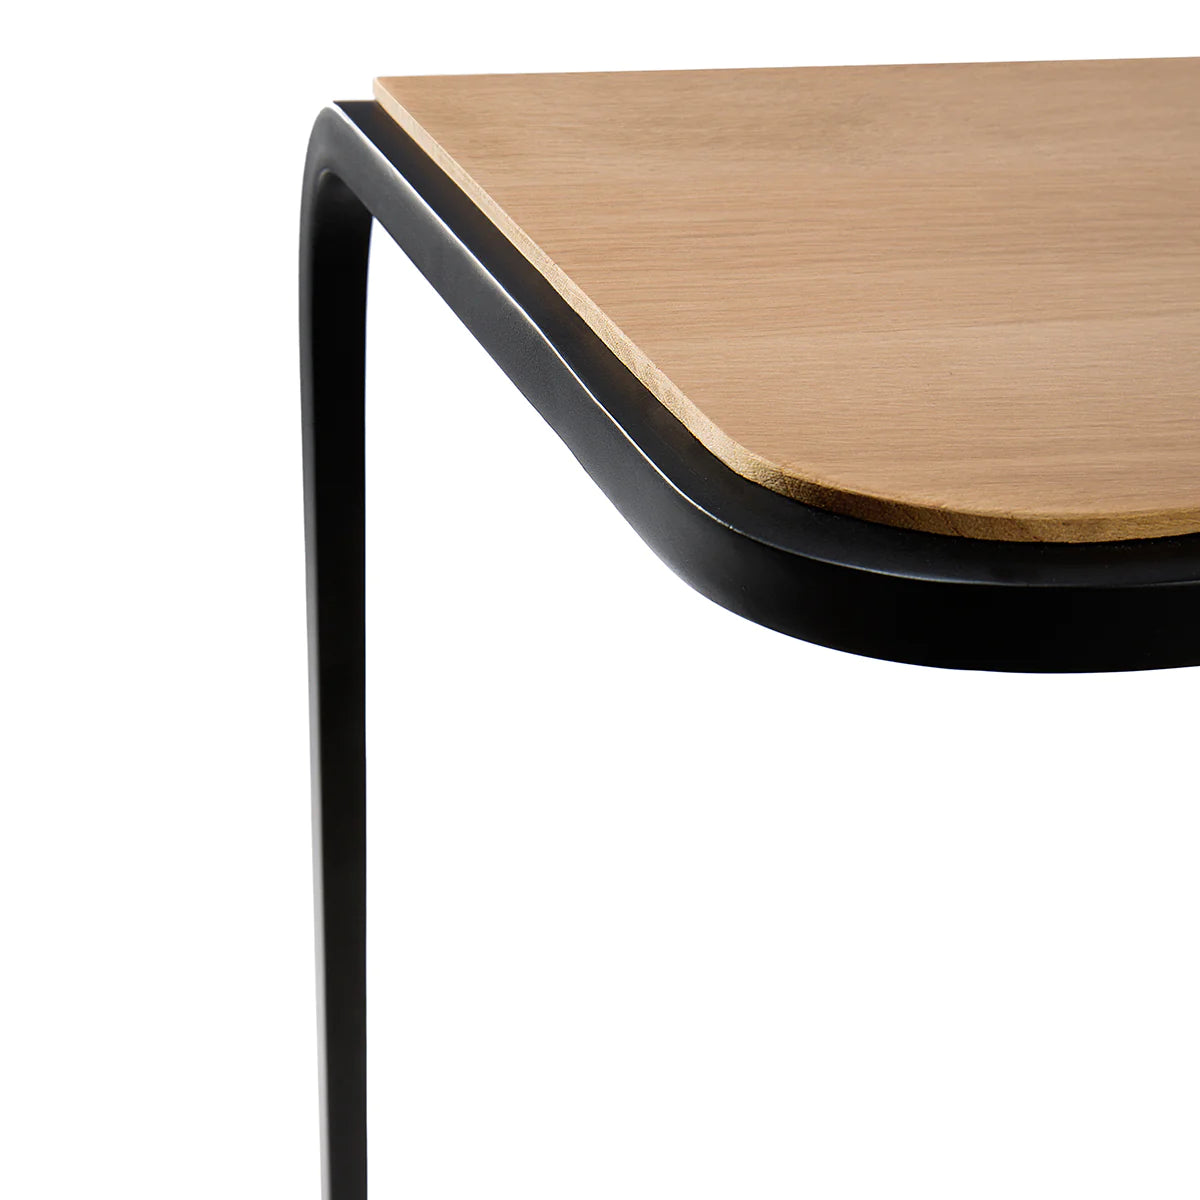 Oak N701 Ethnicraft Side Table available from Make Your House A Home, Bendigo, Victoria, Australia